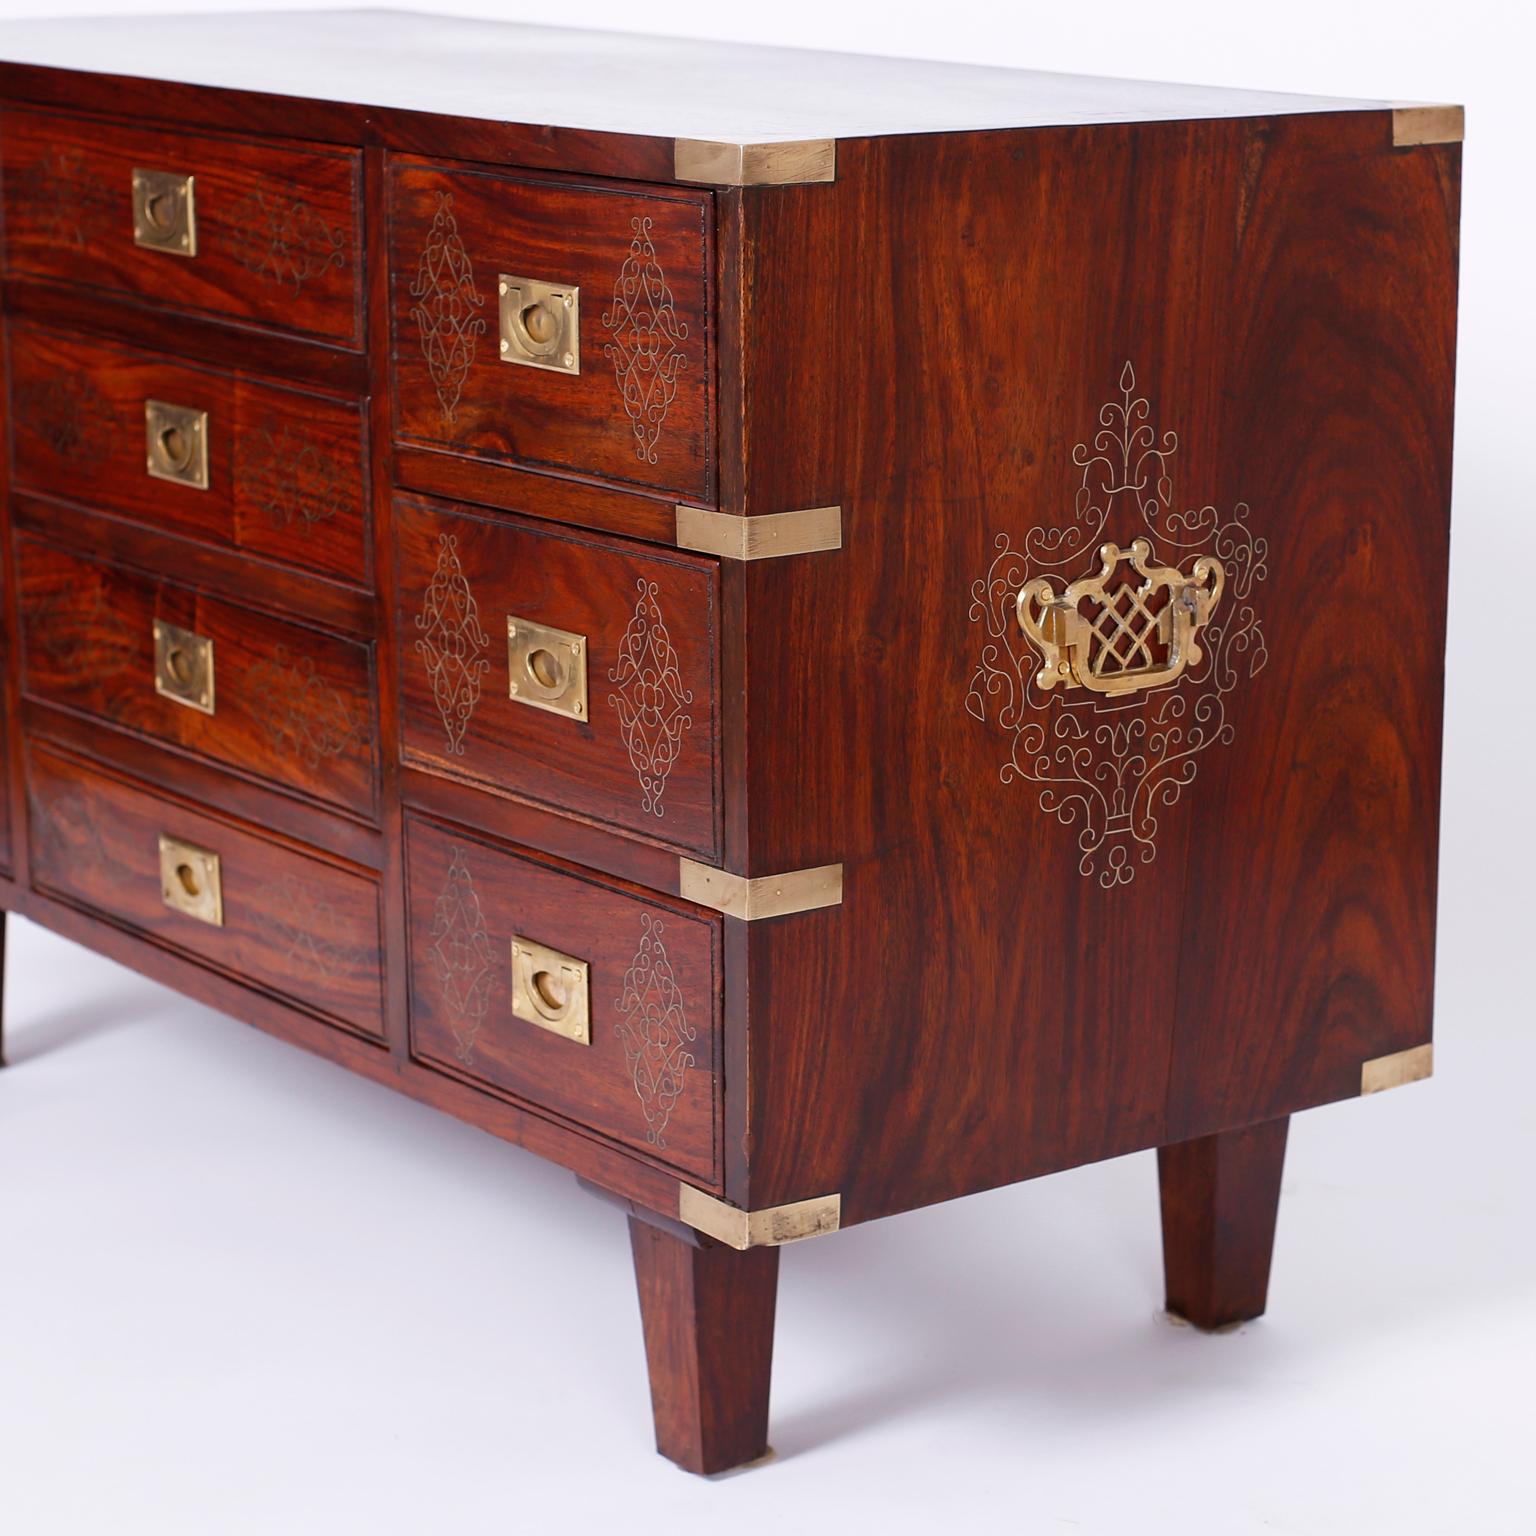 Anglo-Indian Rosewood Inlaid Chest In Good Condition For Sale In Palm Beach, FL